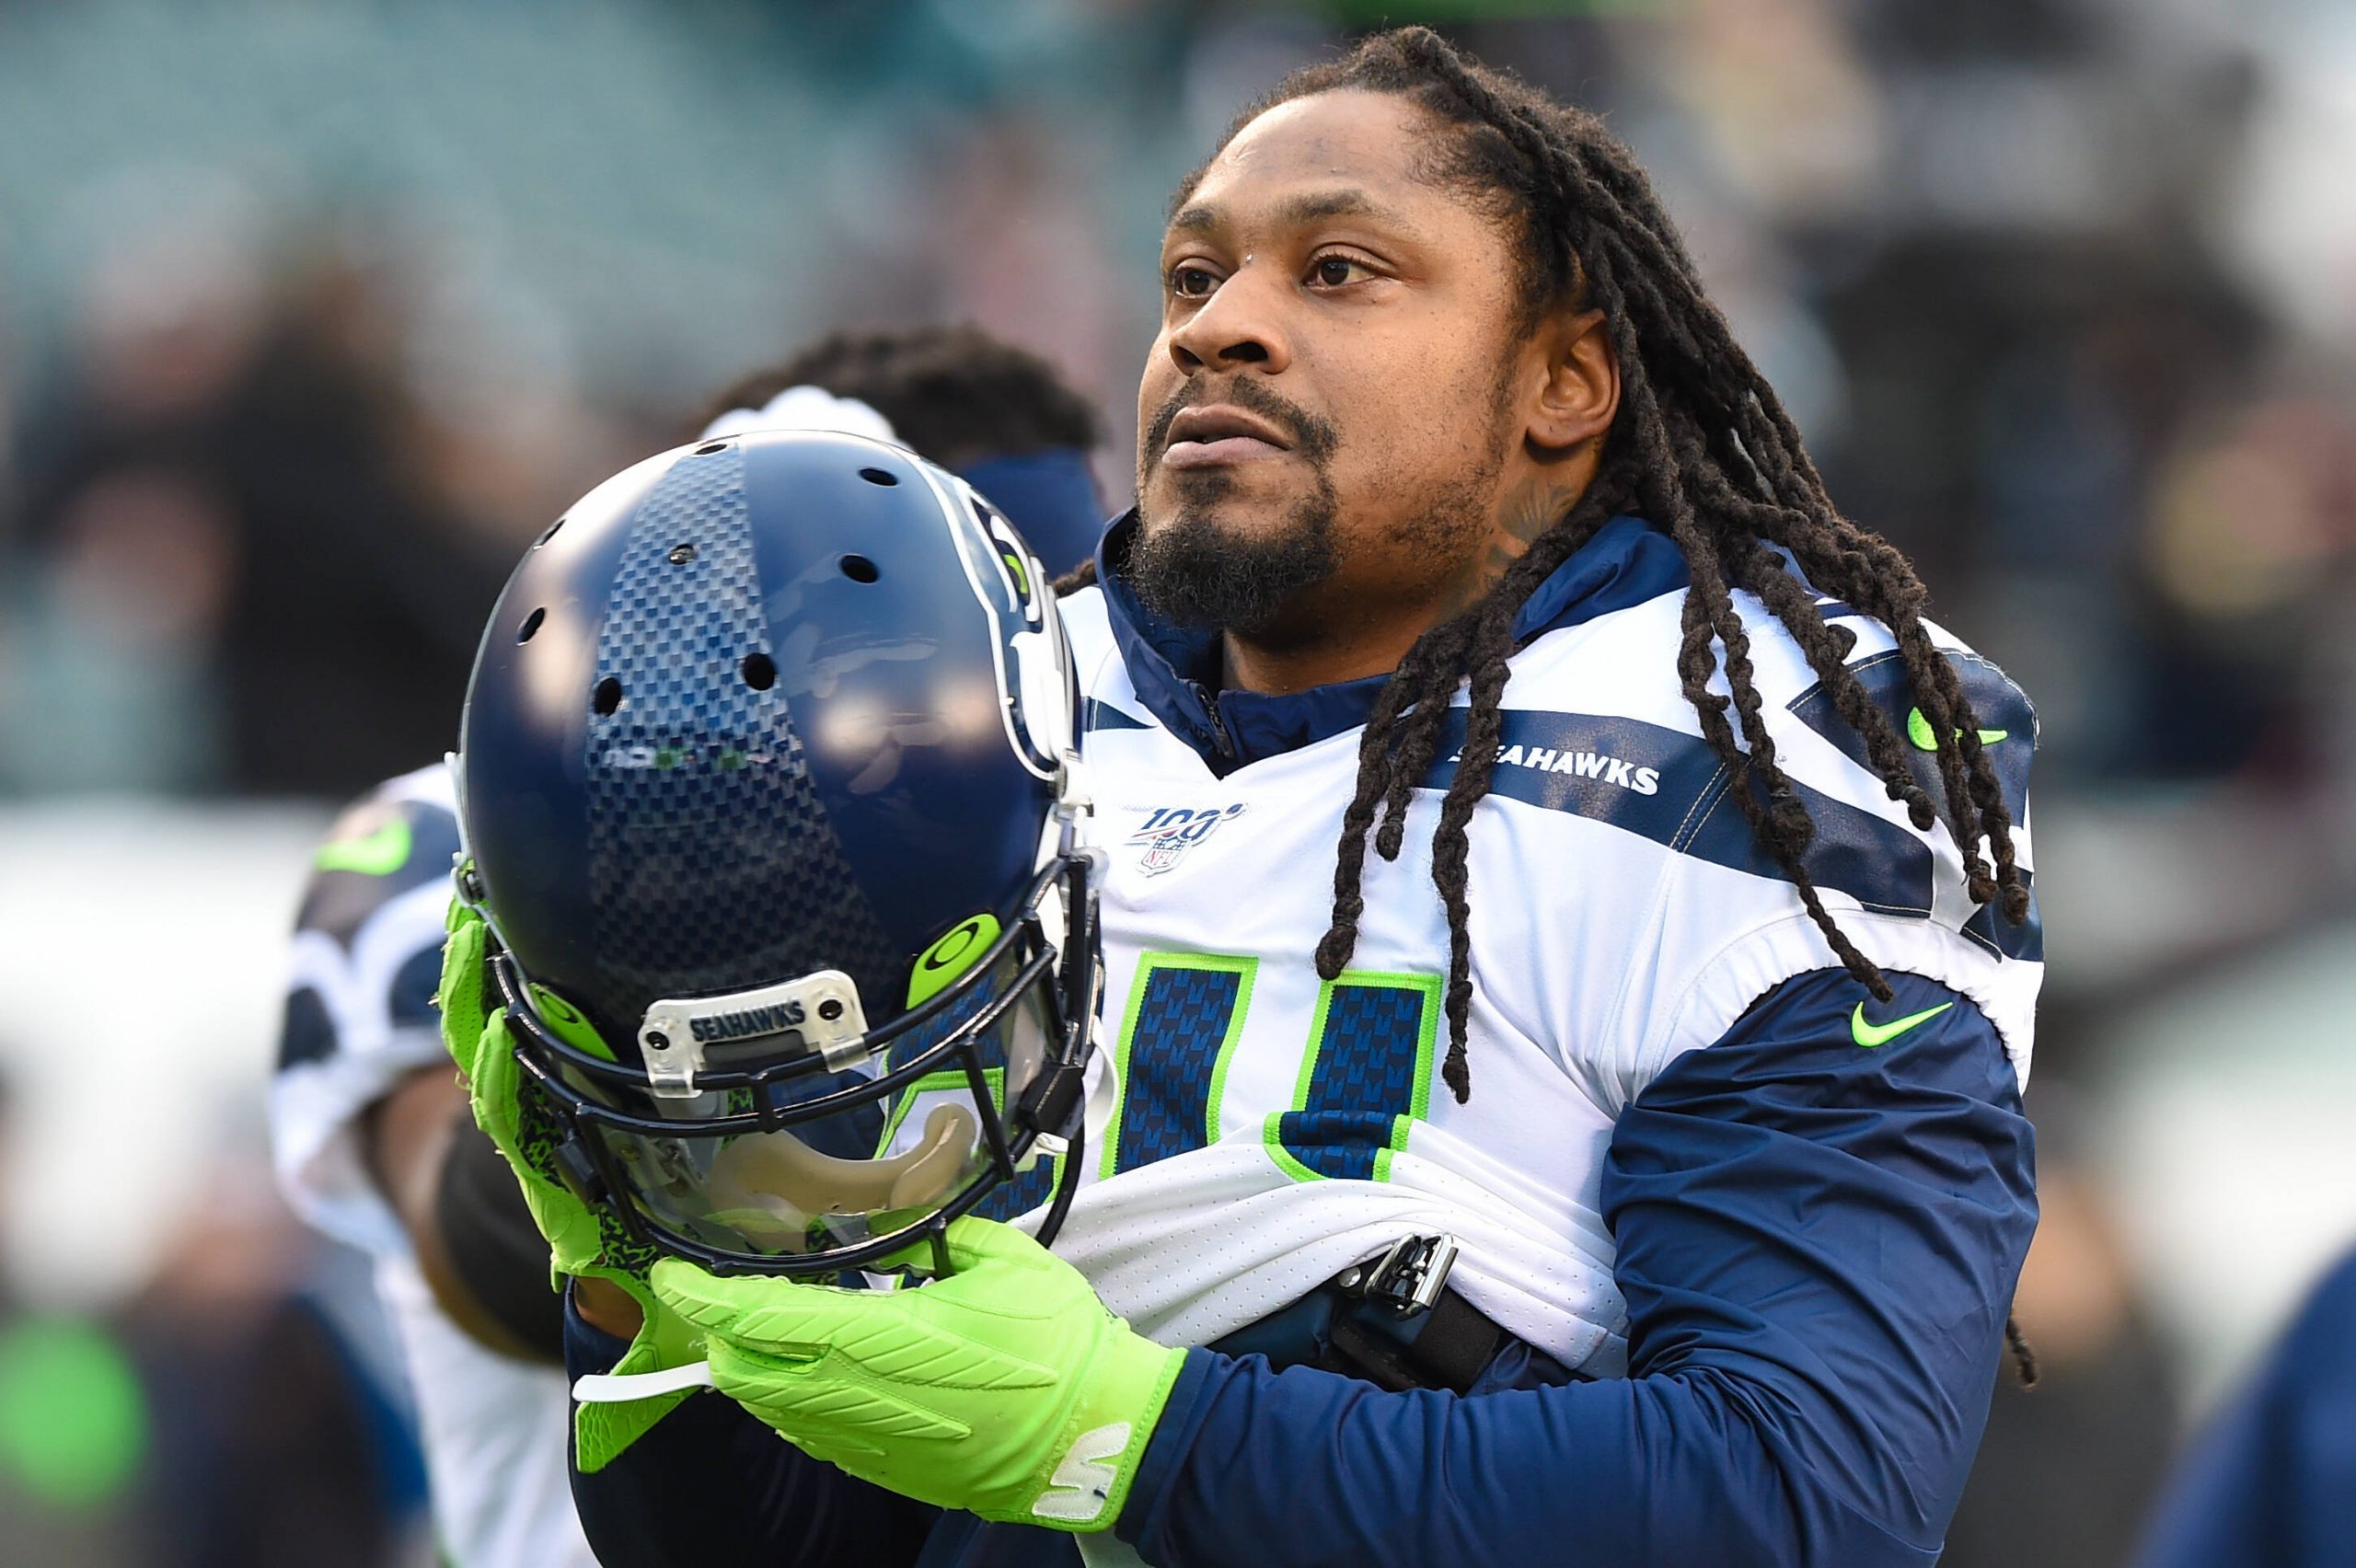 May 05, 2020: FILE: Free-agent running back MARSHAWN LYNCH says his agent has been in discussions with the Seahawks about a potential return to Seattle. PICTURED: JAN 05, 2020, Philadelphia, Pennsylvania, USA: Seattle Seahawks running back Marshawn Lynch (24) warms up prior to the NFC wild card matchup between the Seattle Seahawks and the Philadelphia Eagles at Lincoln Financial Field in Philadelphia, PA. Marshawn Lynch in Talks on Return with Seahawks - ZUMAcjm_ 20200105_zaf_cjm_055 Copyright: xJohnxMiddlebrookx